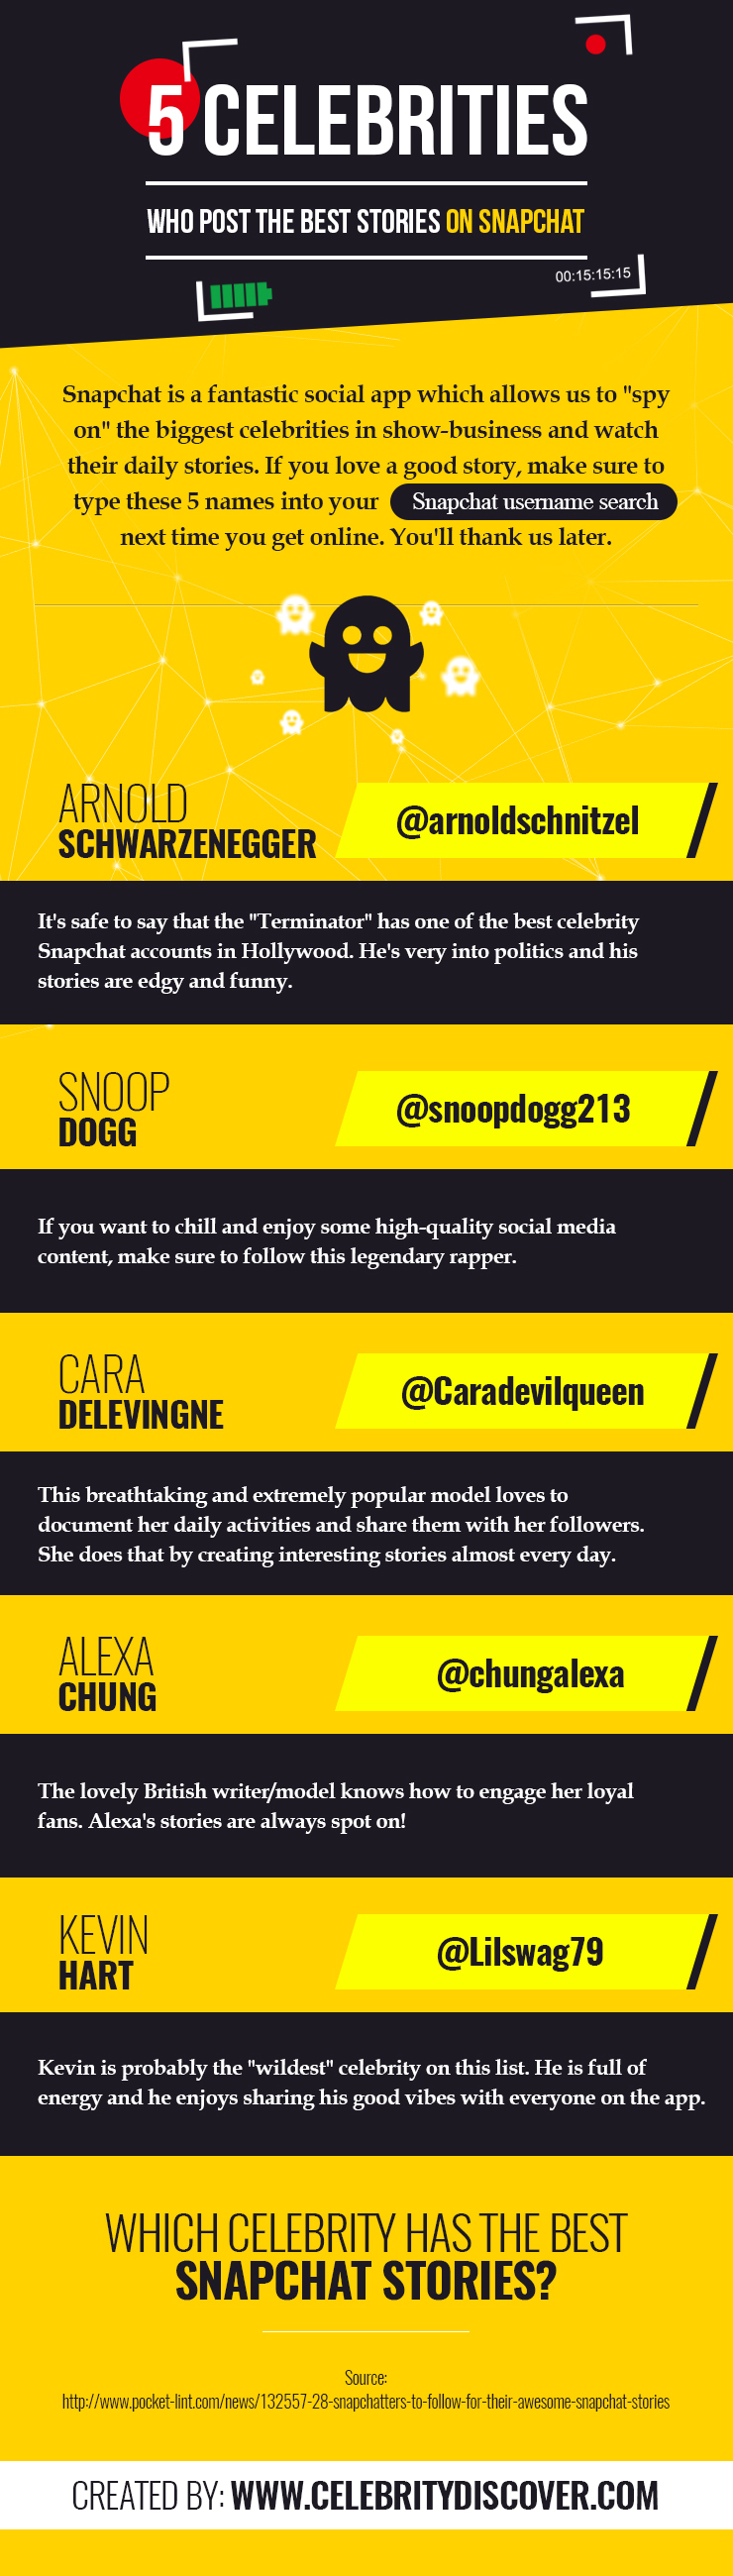 5 Celebrities Who Post The Best Stories On Snapchat